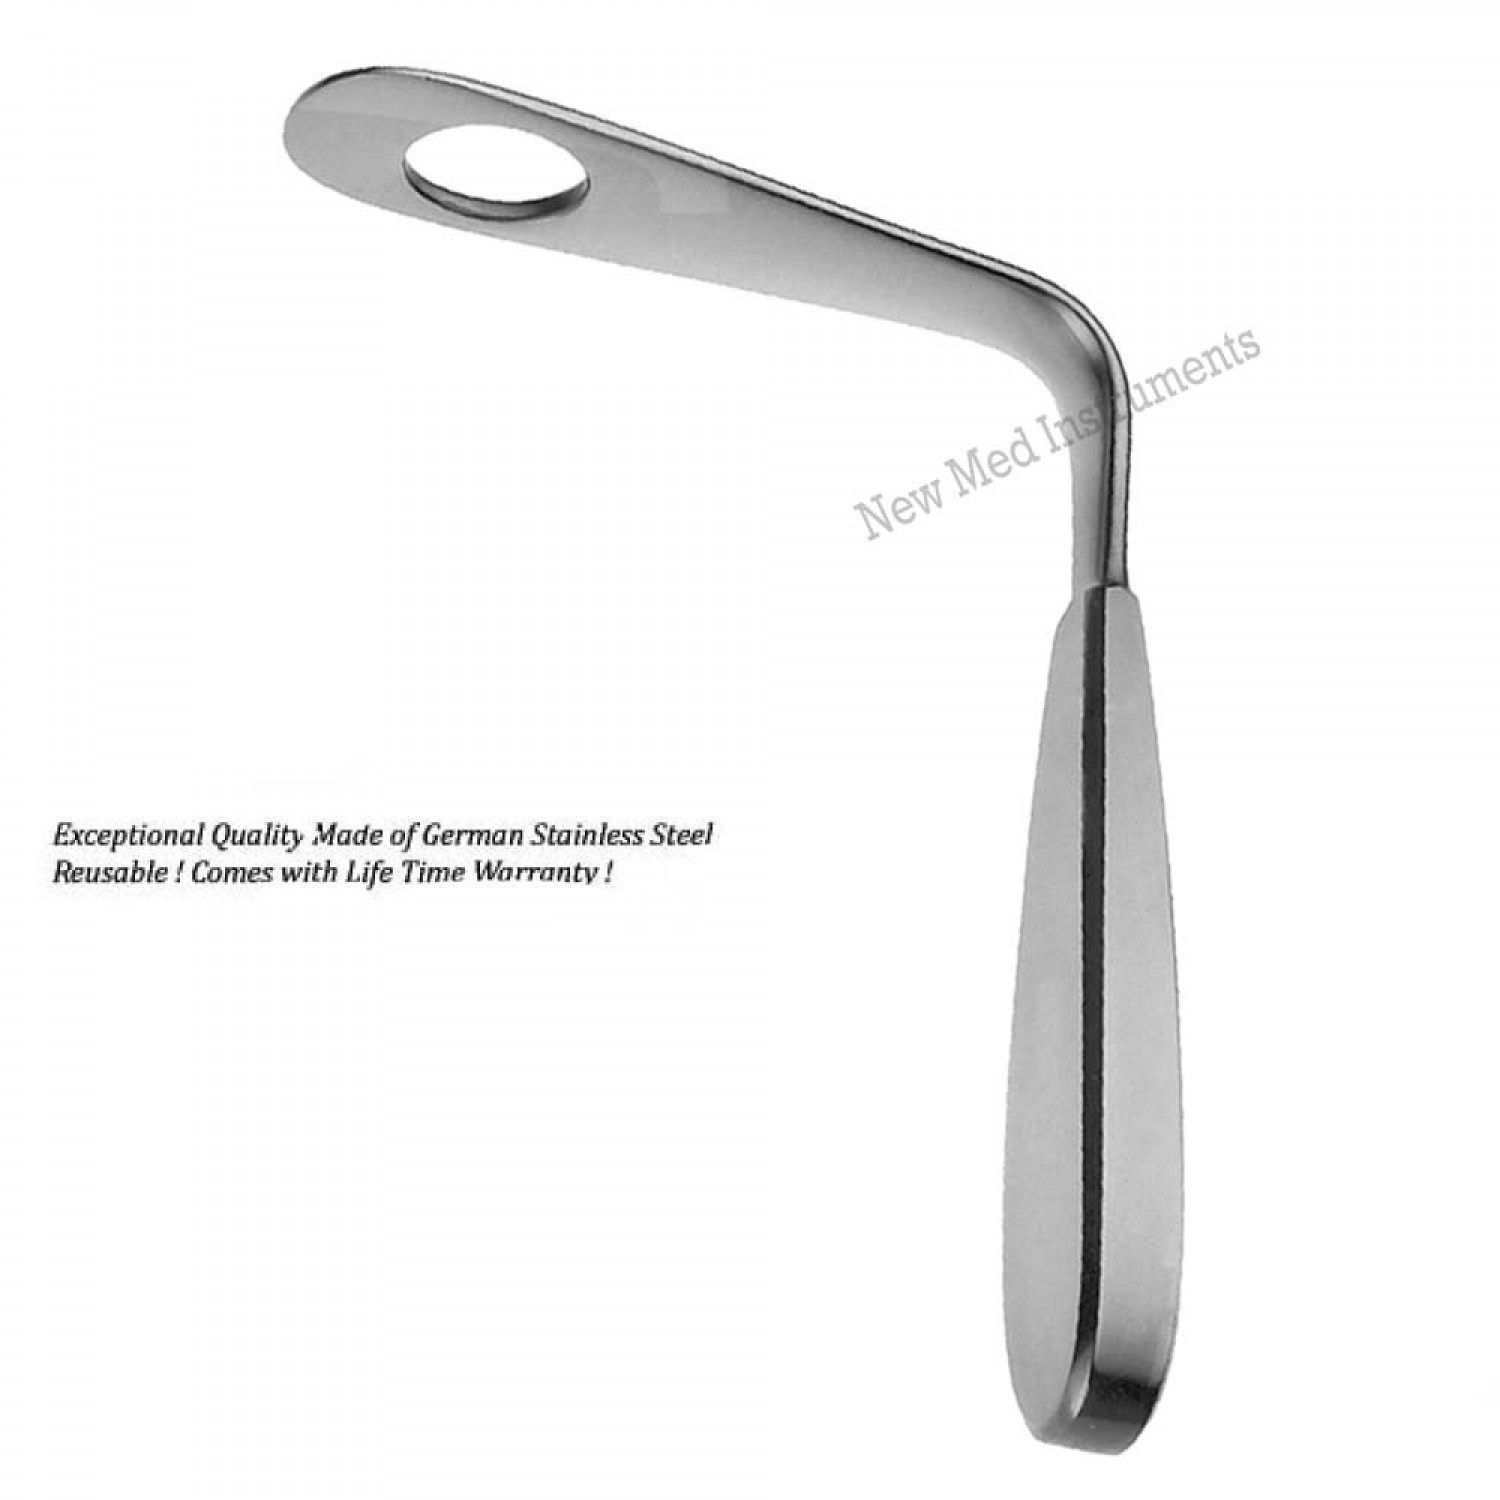 Bosworth tongue depressor - right angle/handle - 25mm, 80mm shaft  length,Stainless Steel